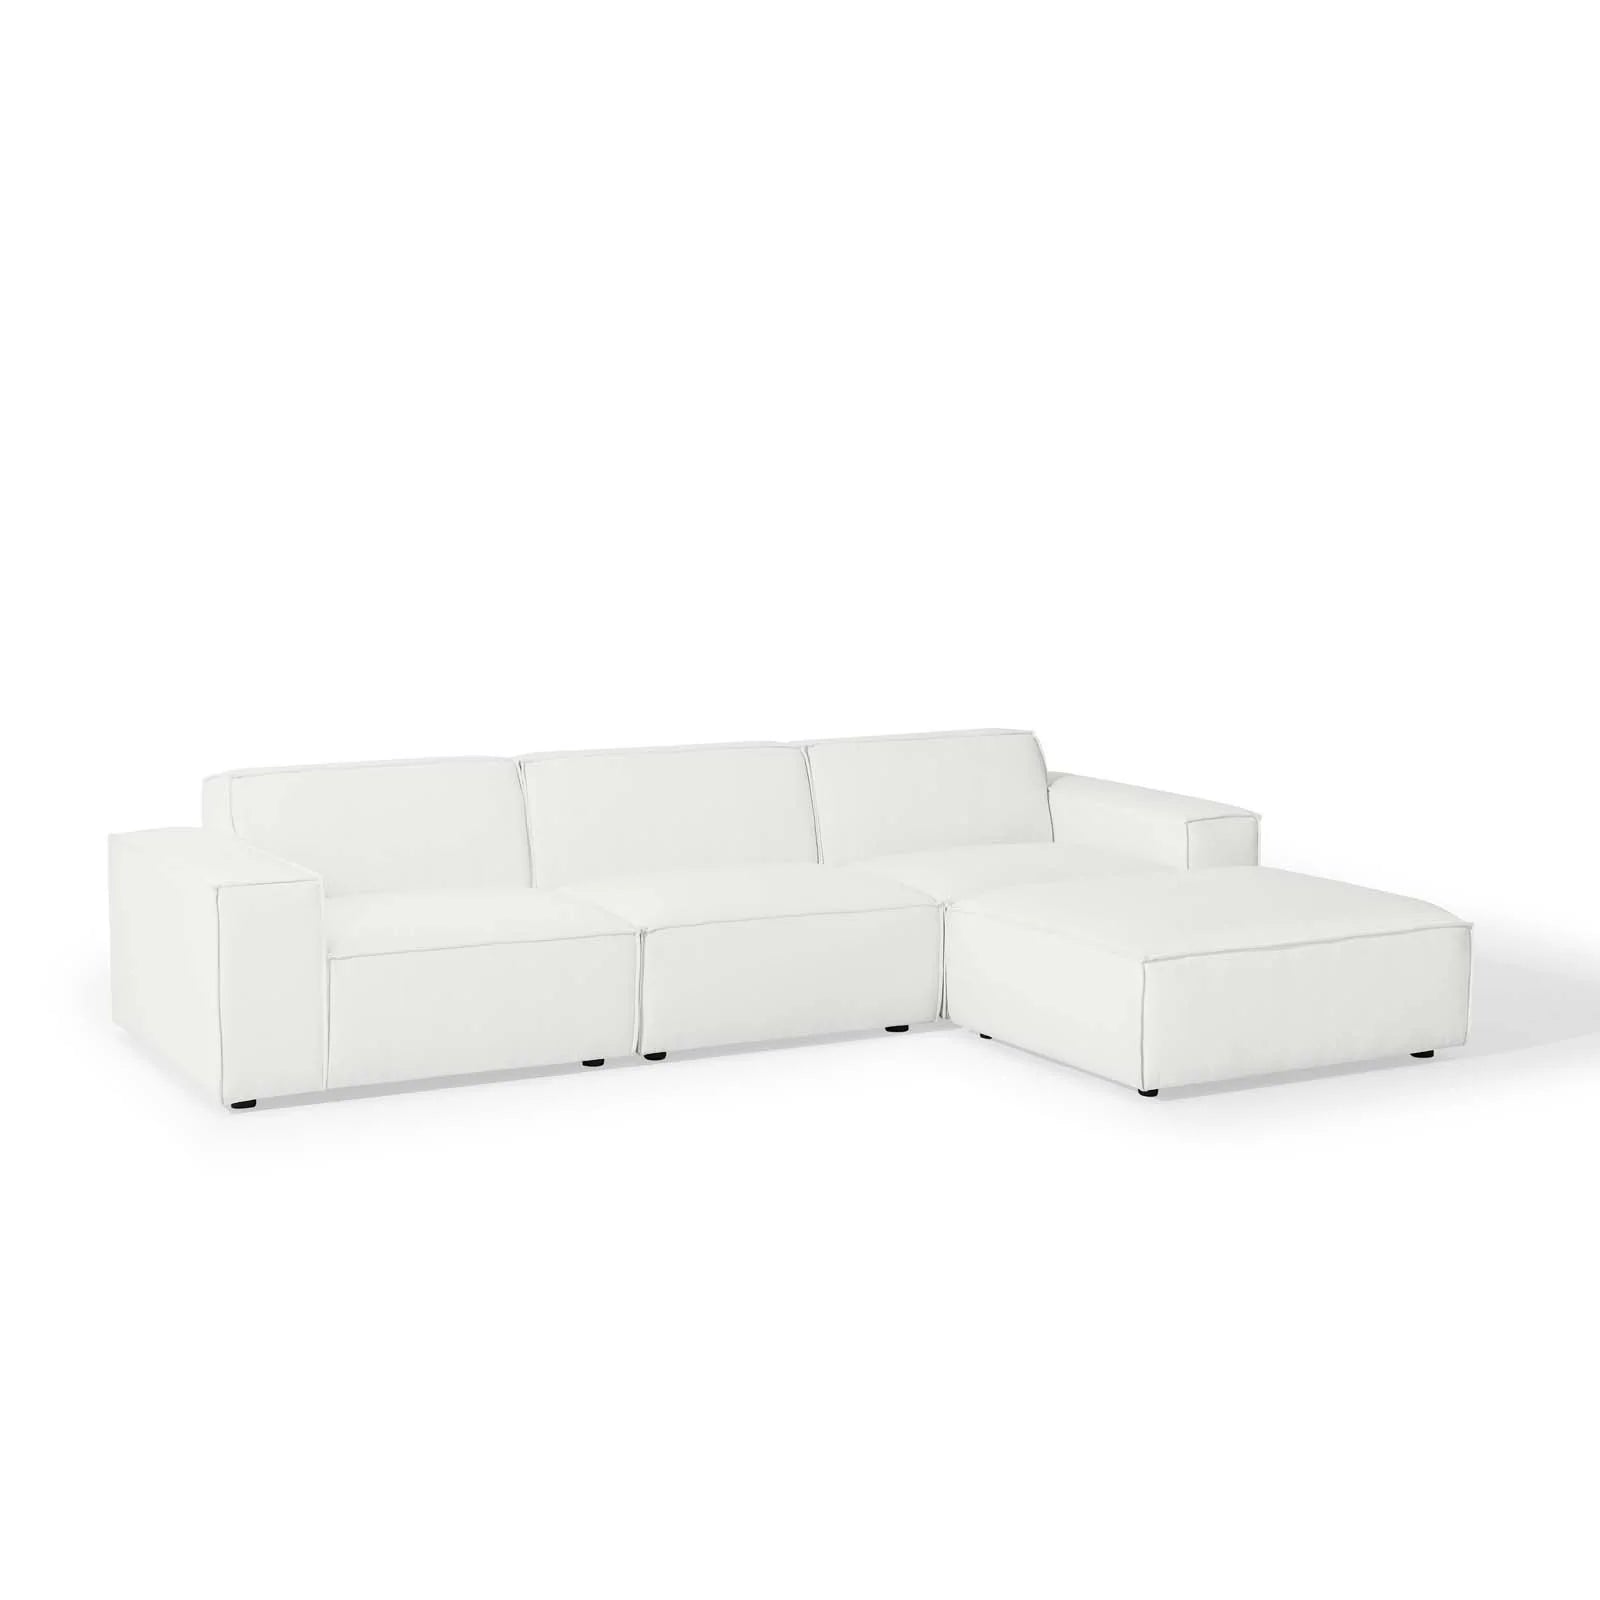 Breeze 4 Piece Sectional - White